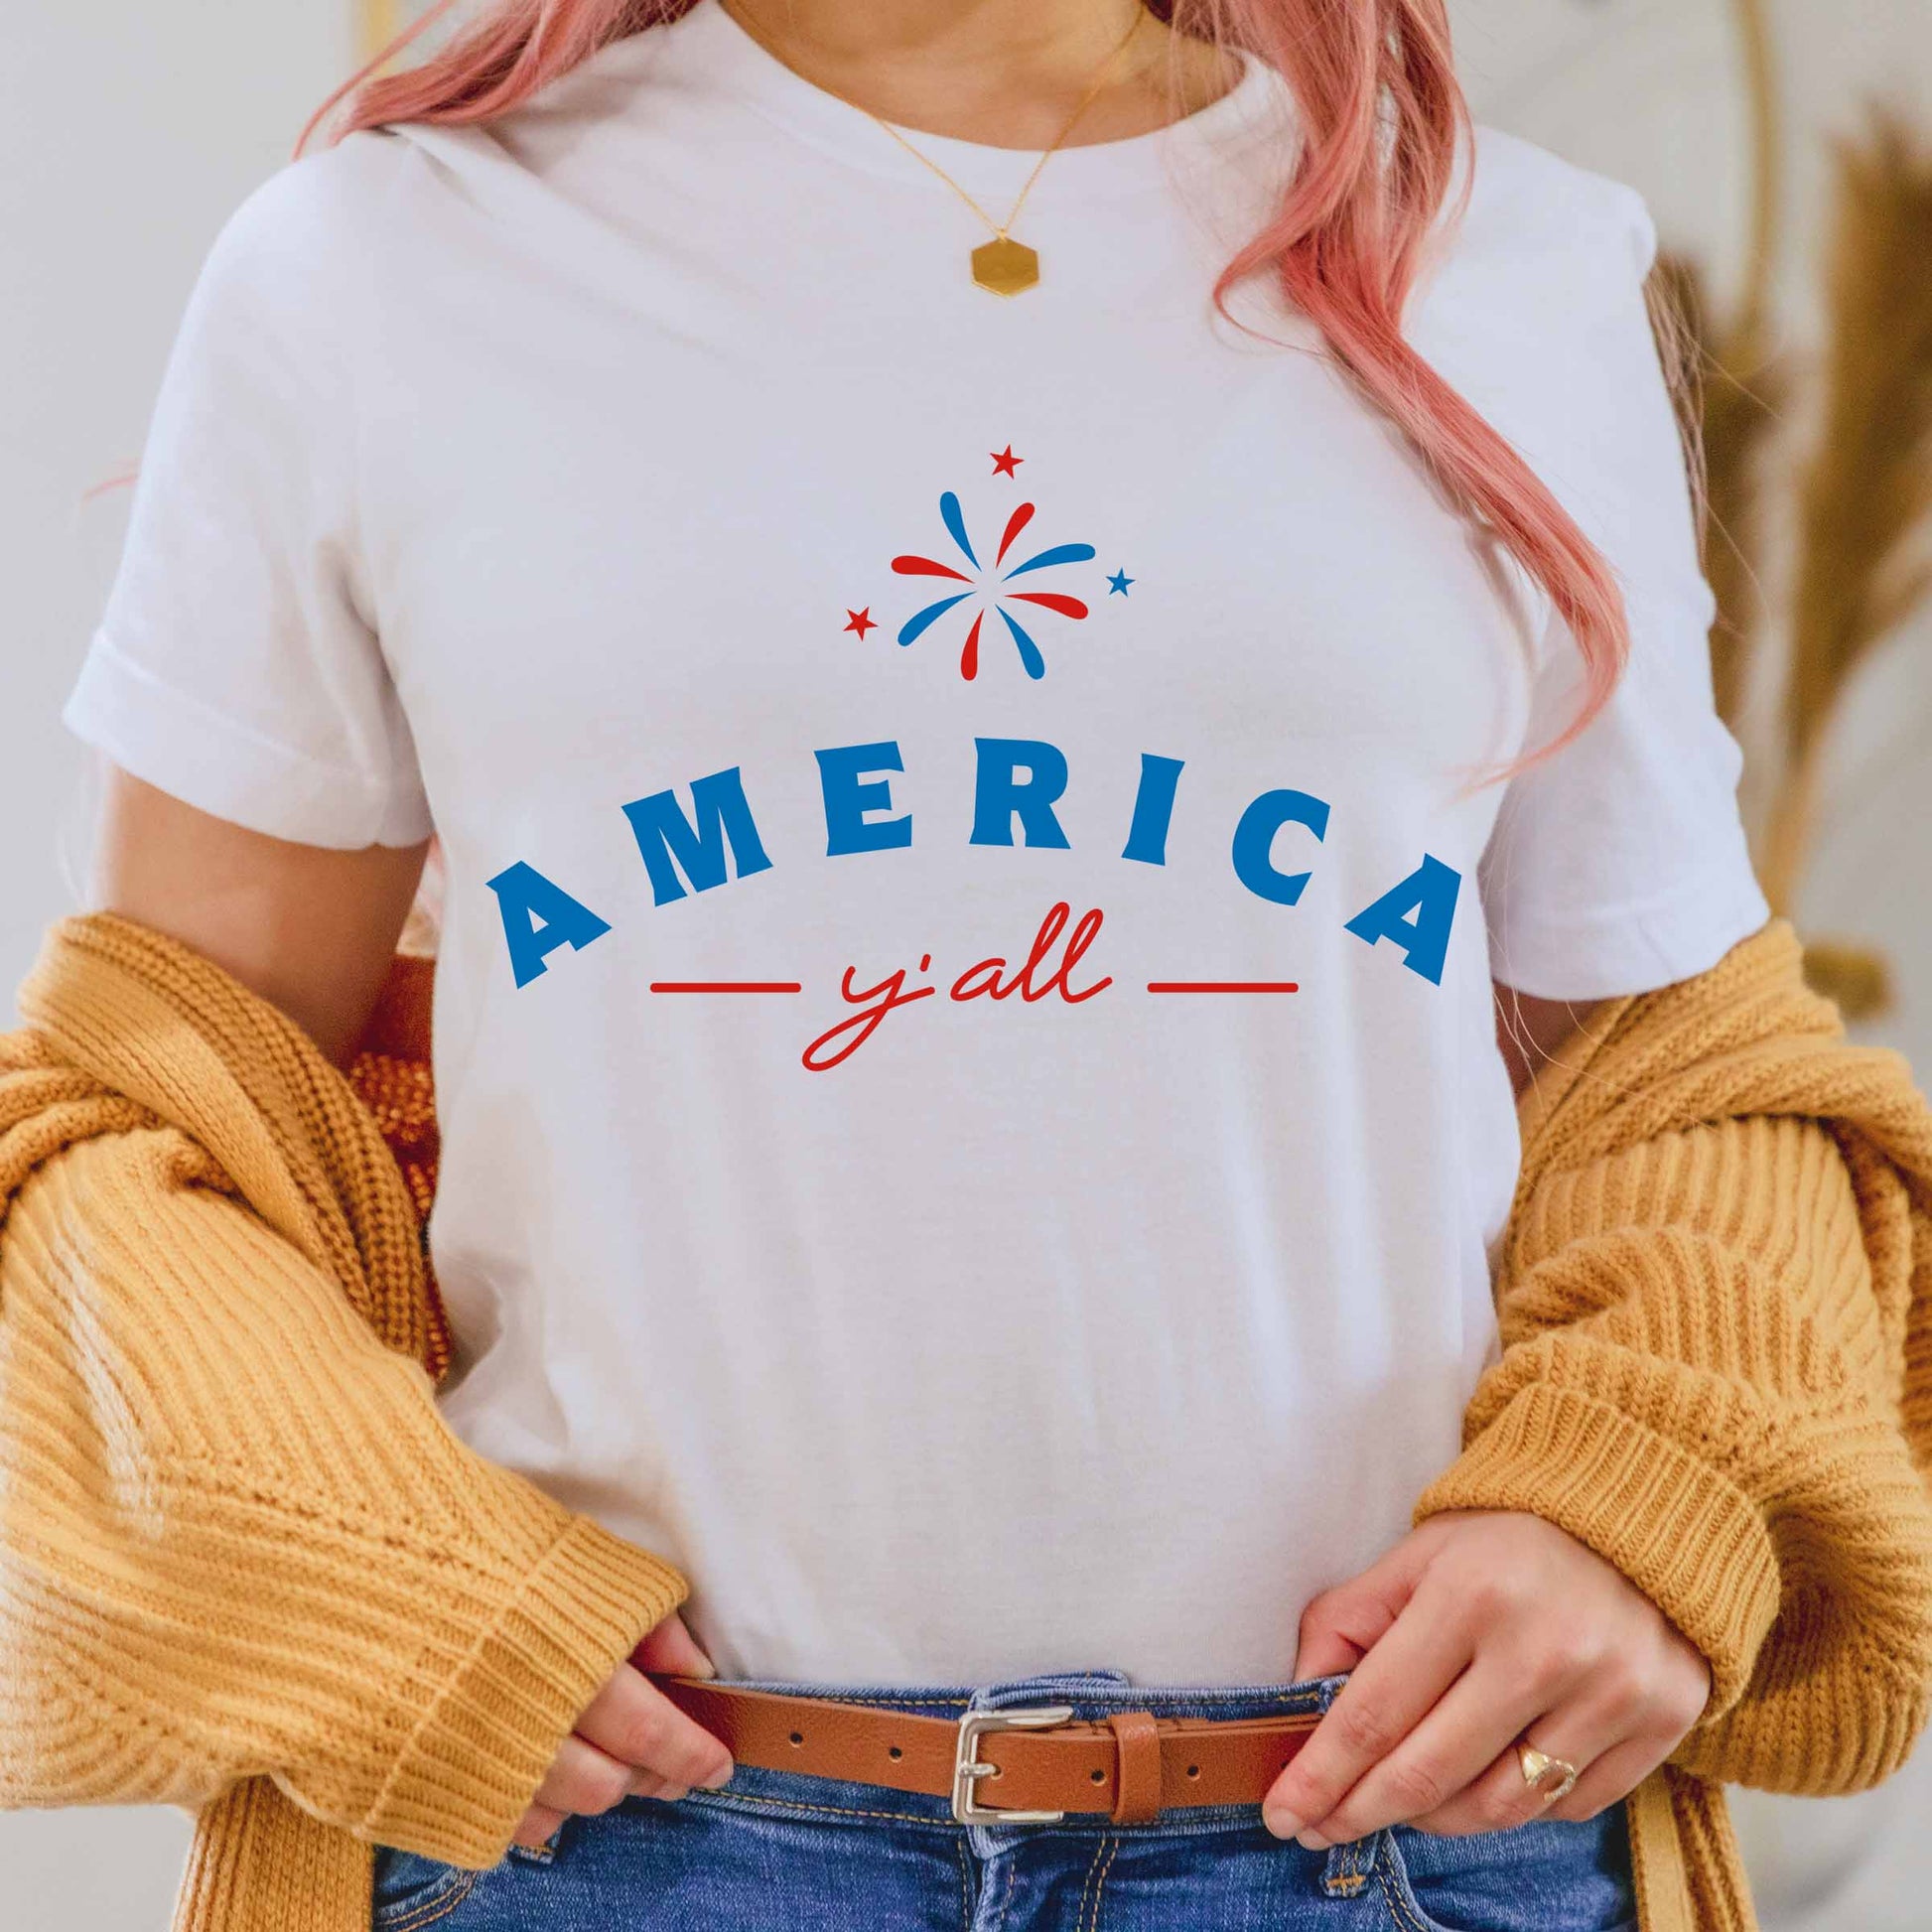 Fourth of July Graphic T-shirt